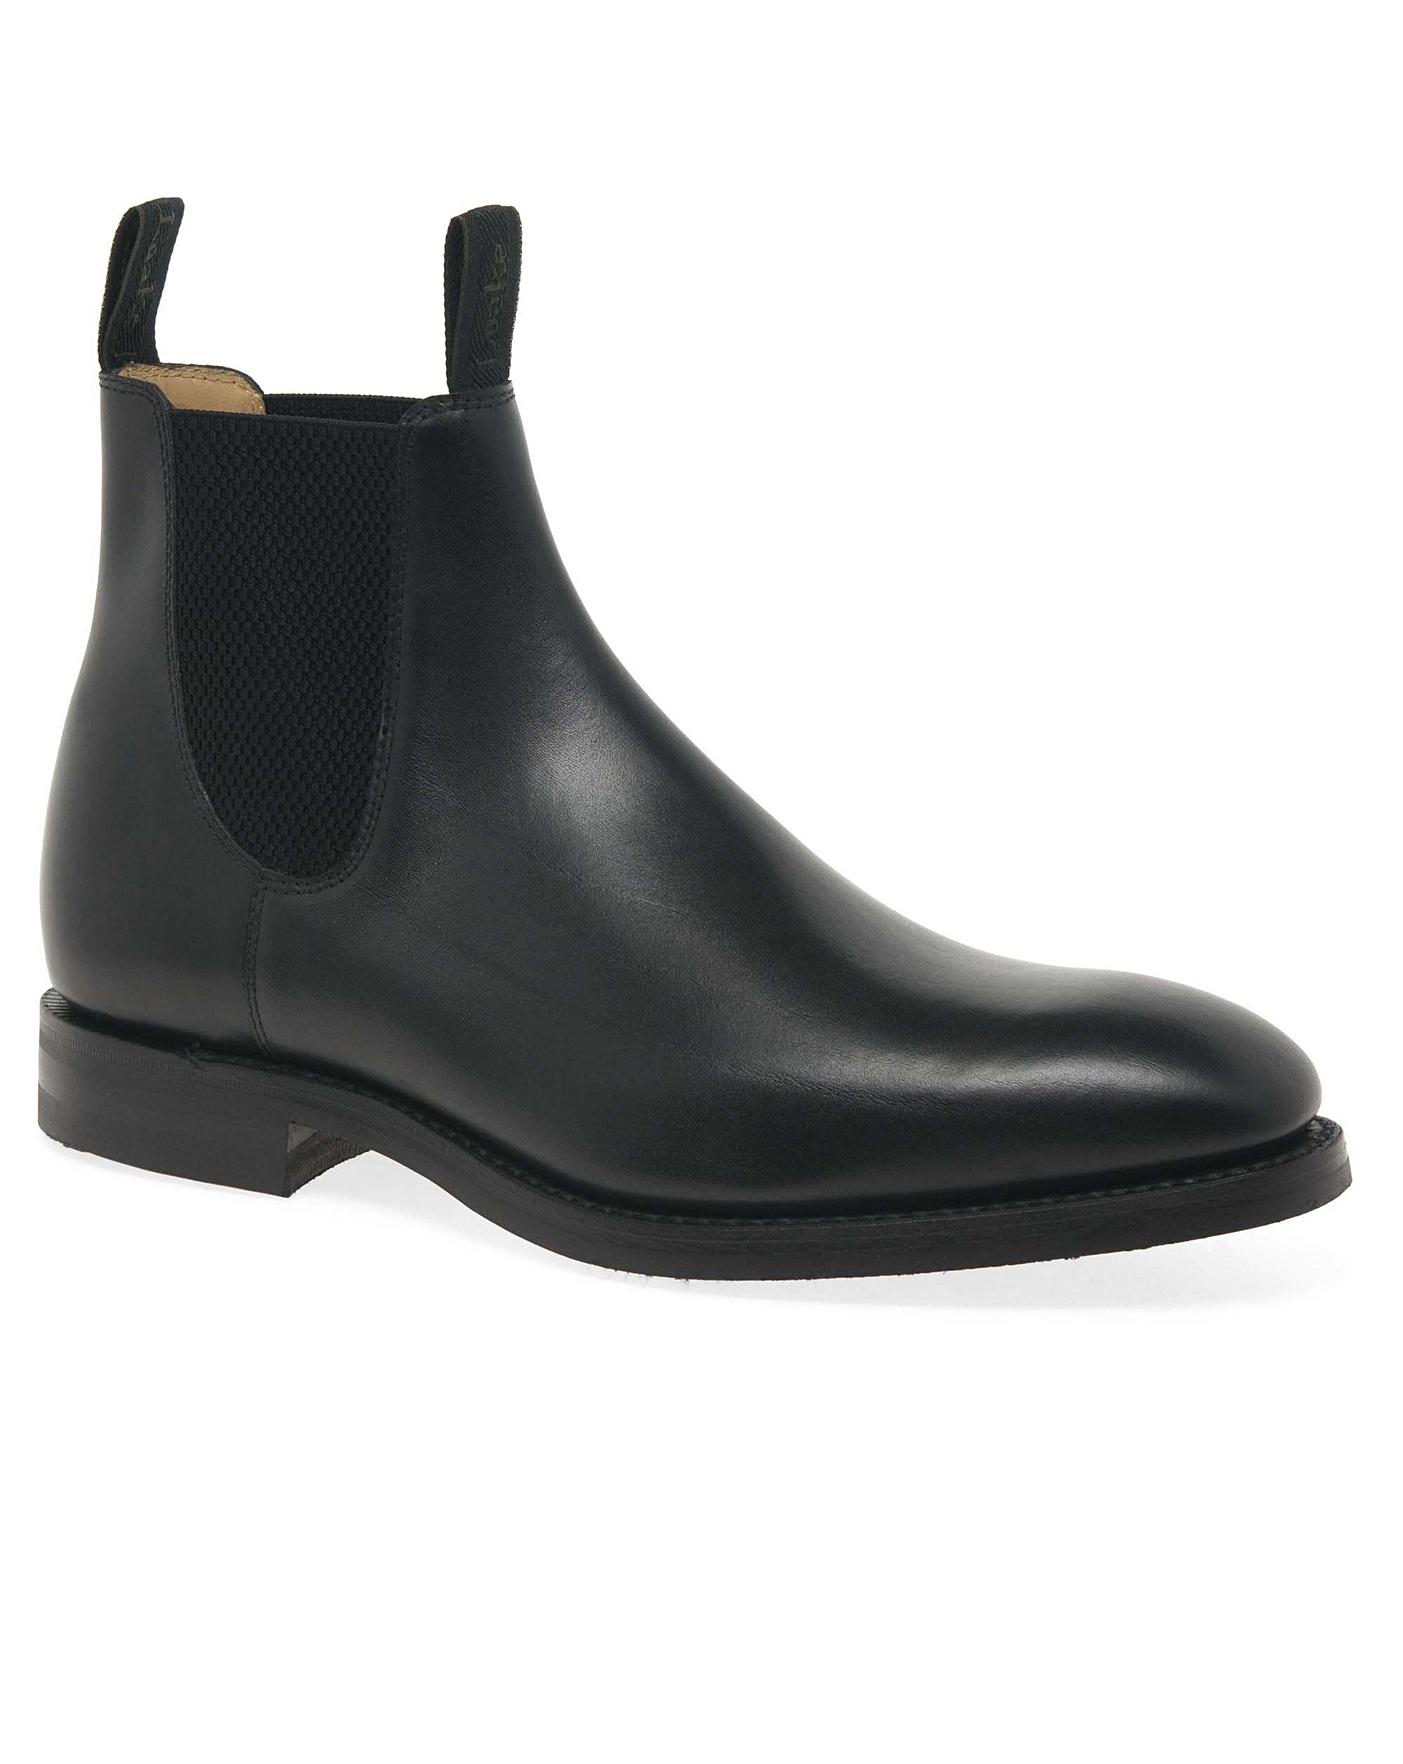 Loake Chatsworth Mens Wide Leather Boots | Premier Man